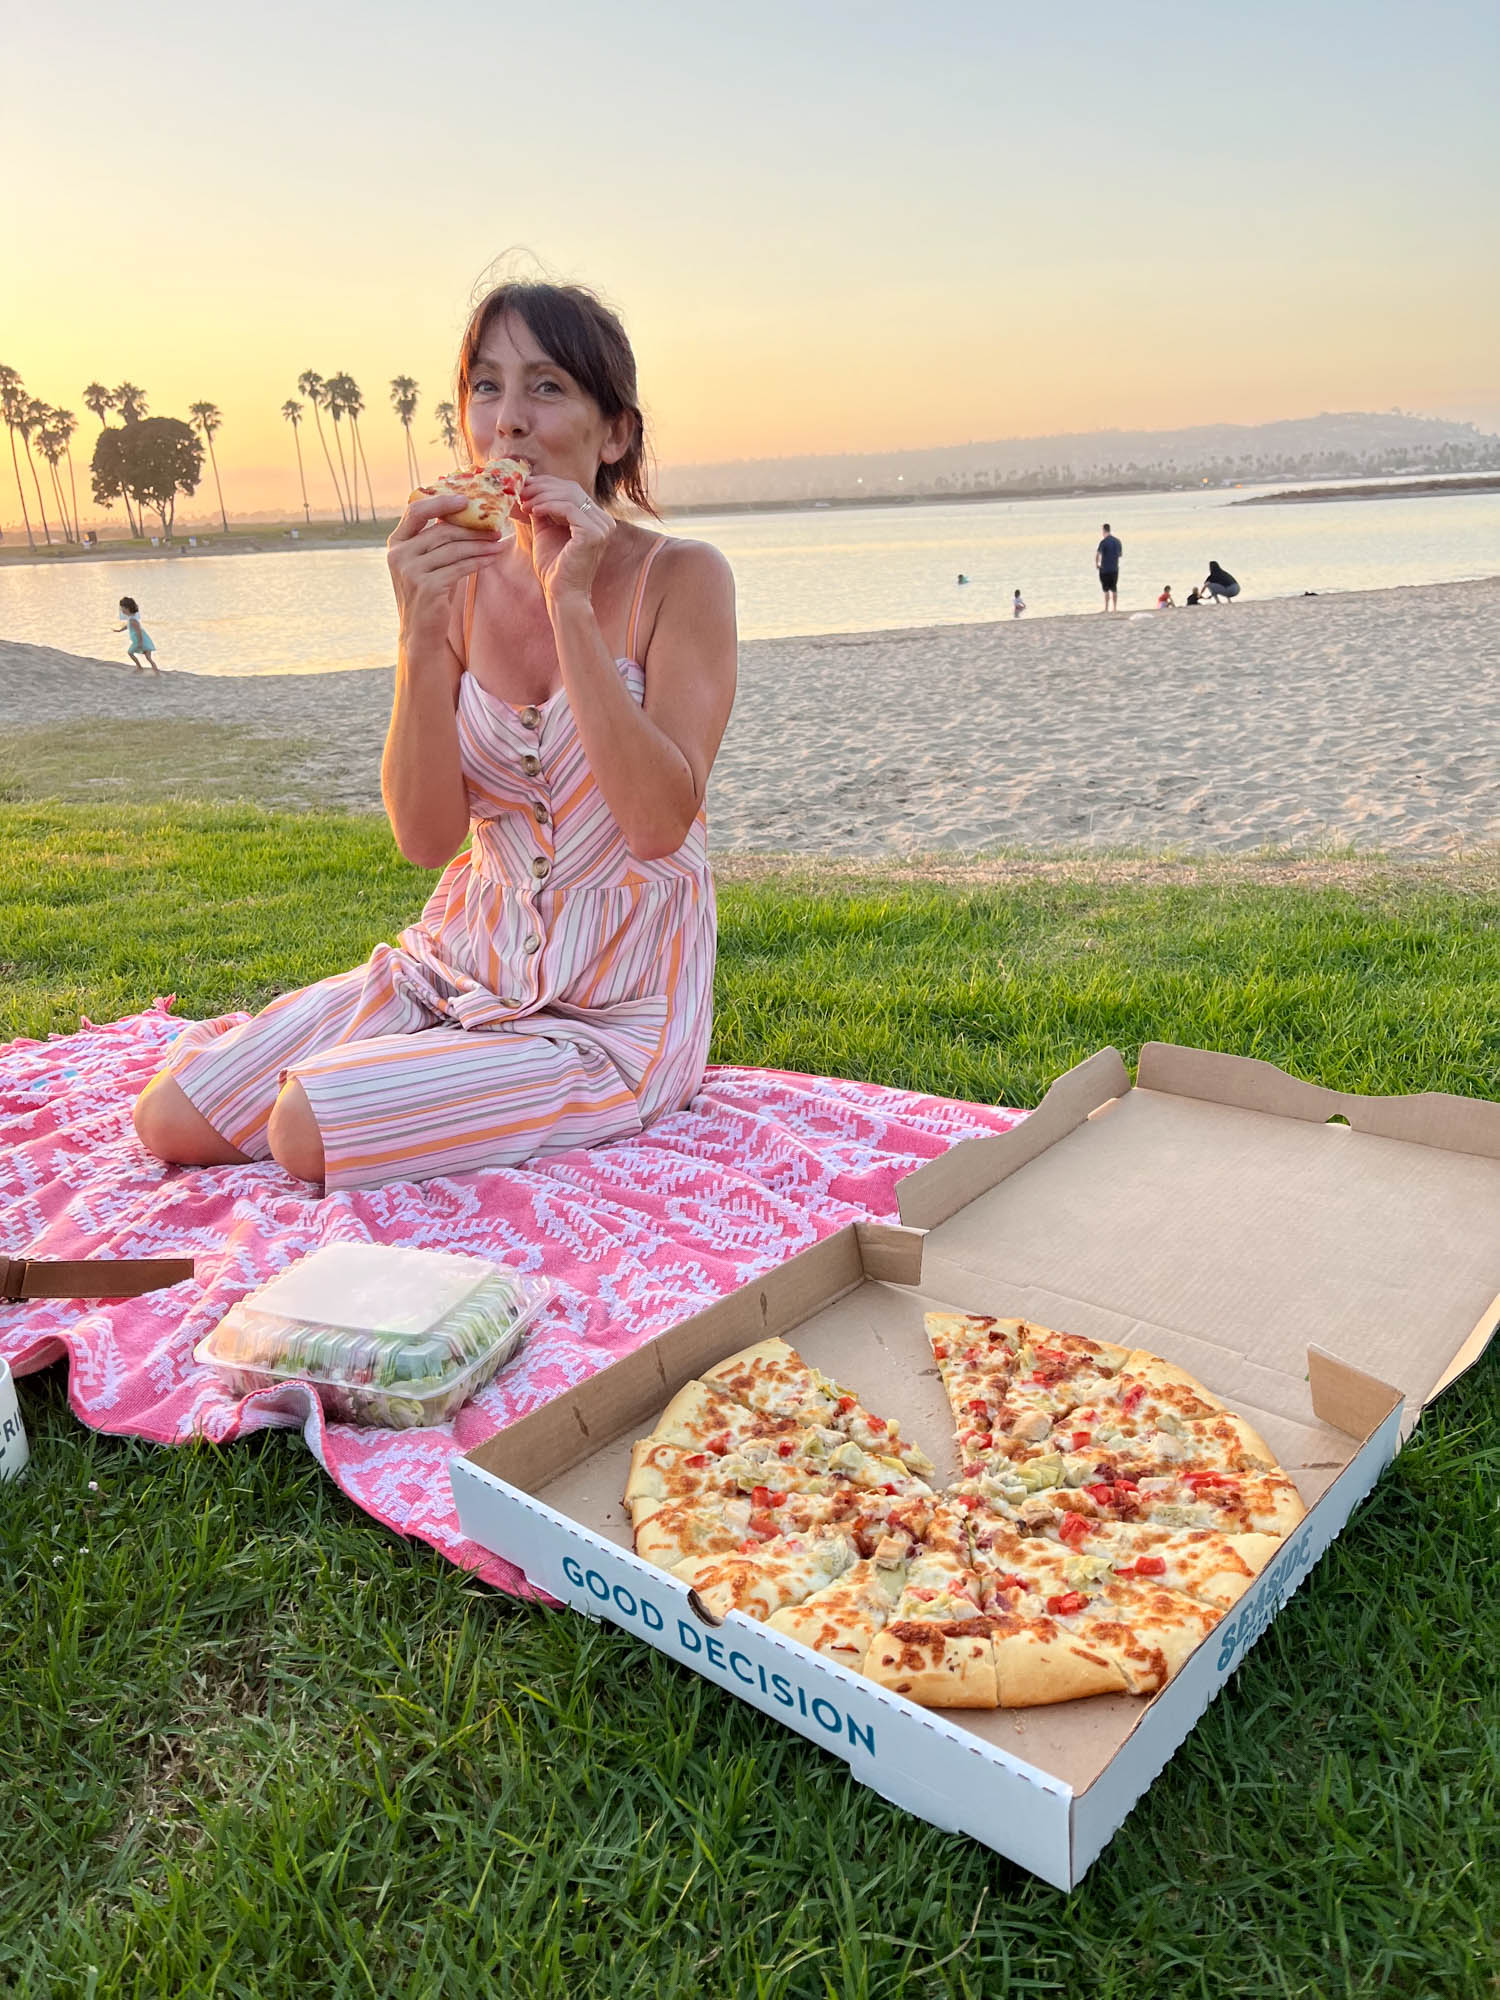 Outdoors, person sitting at the beach, enjoying a slice of take-away pizza